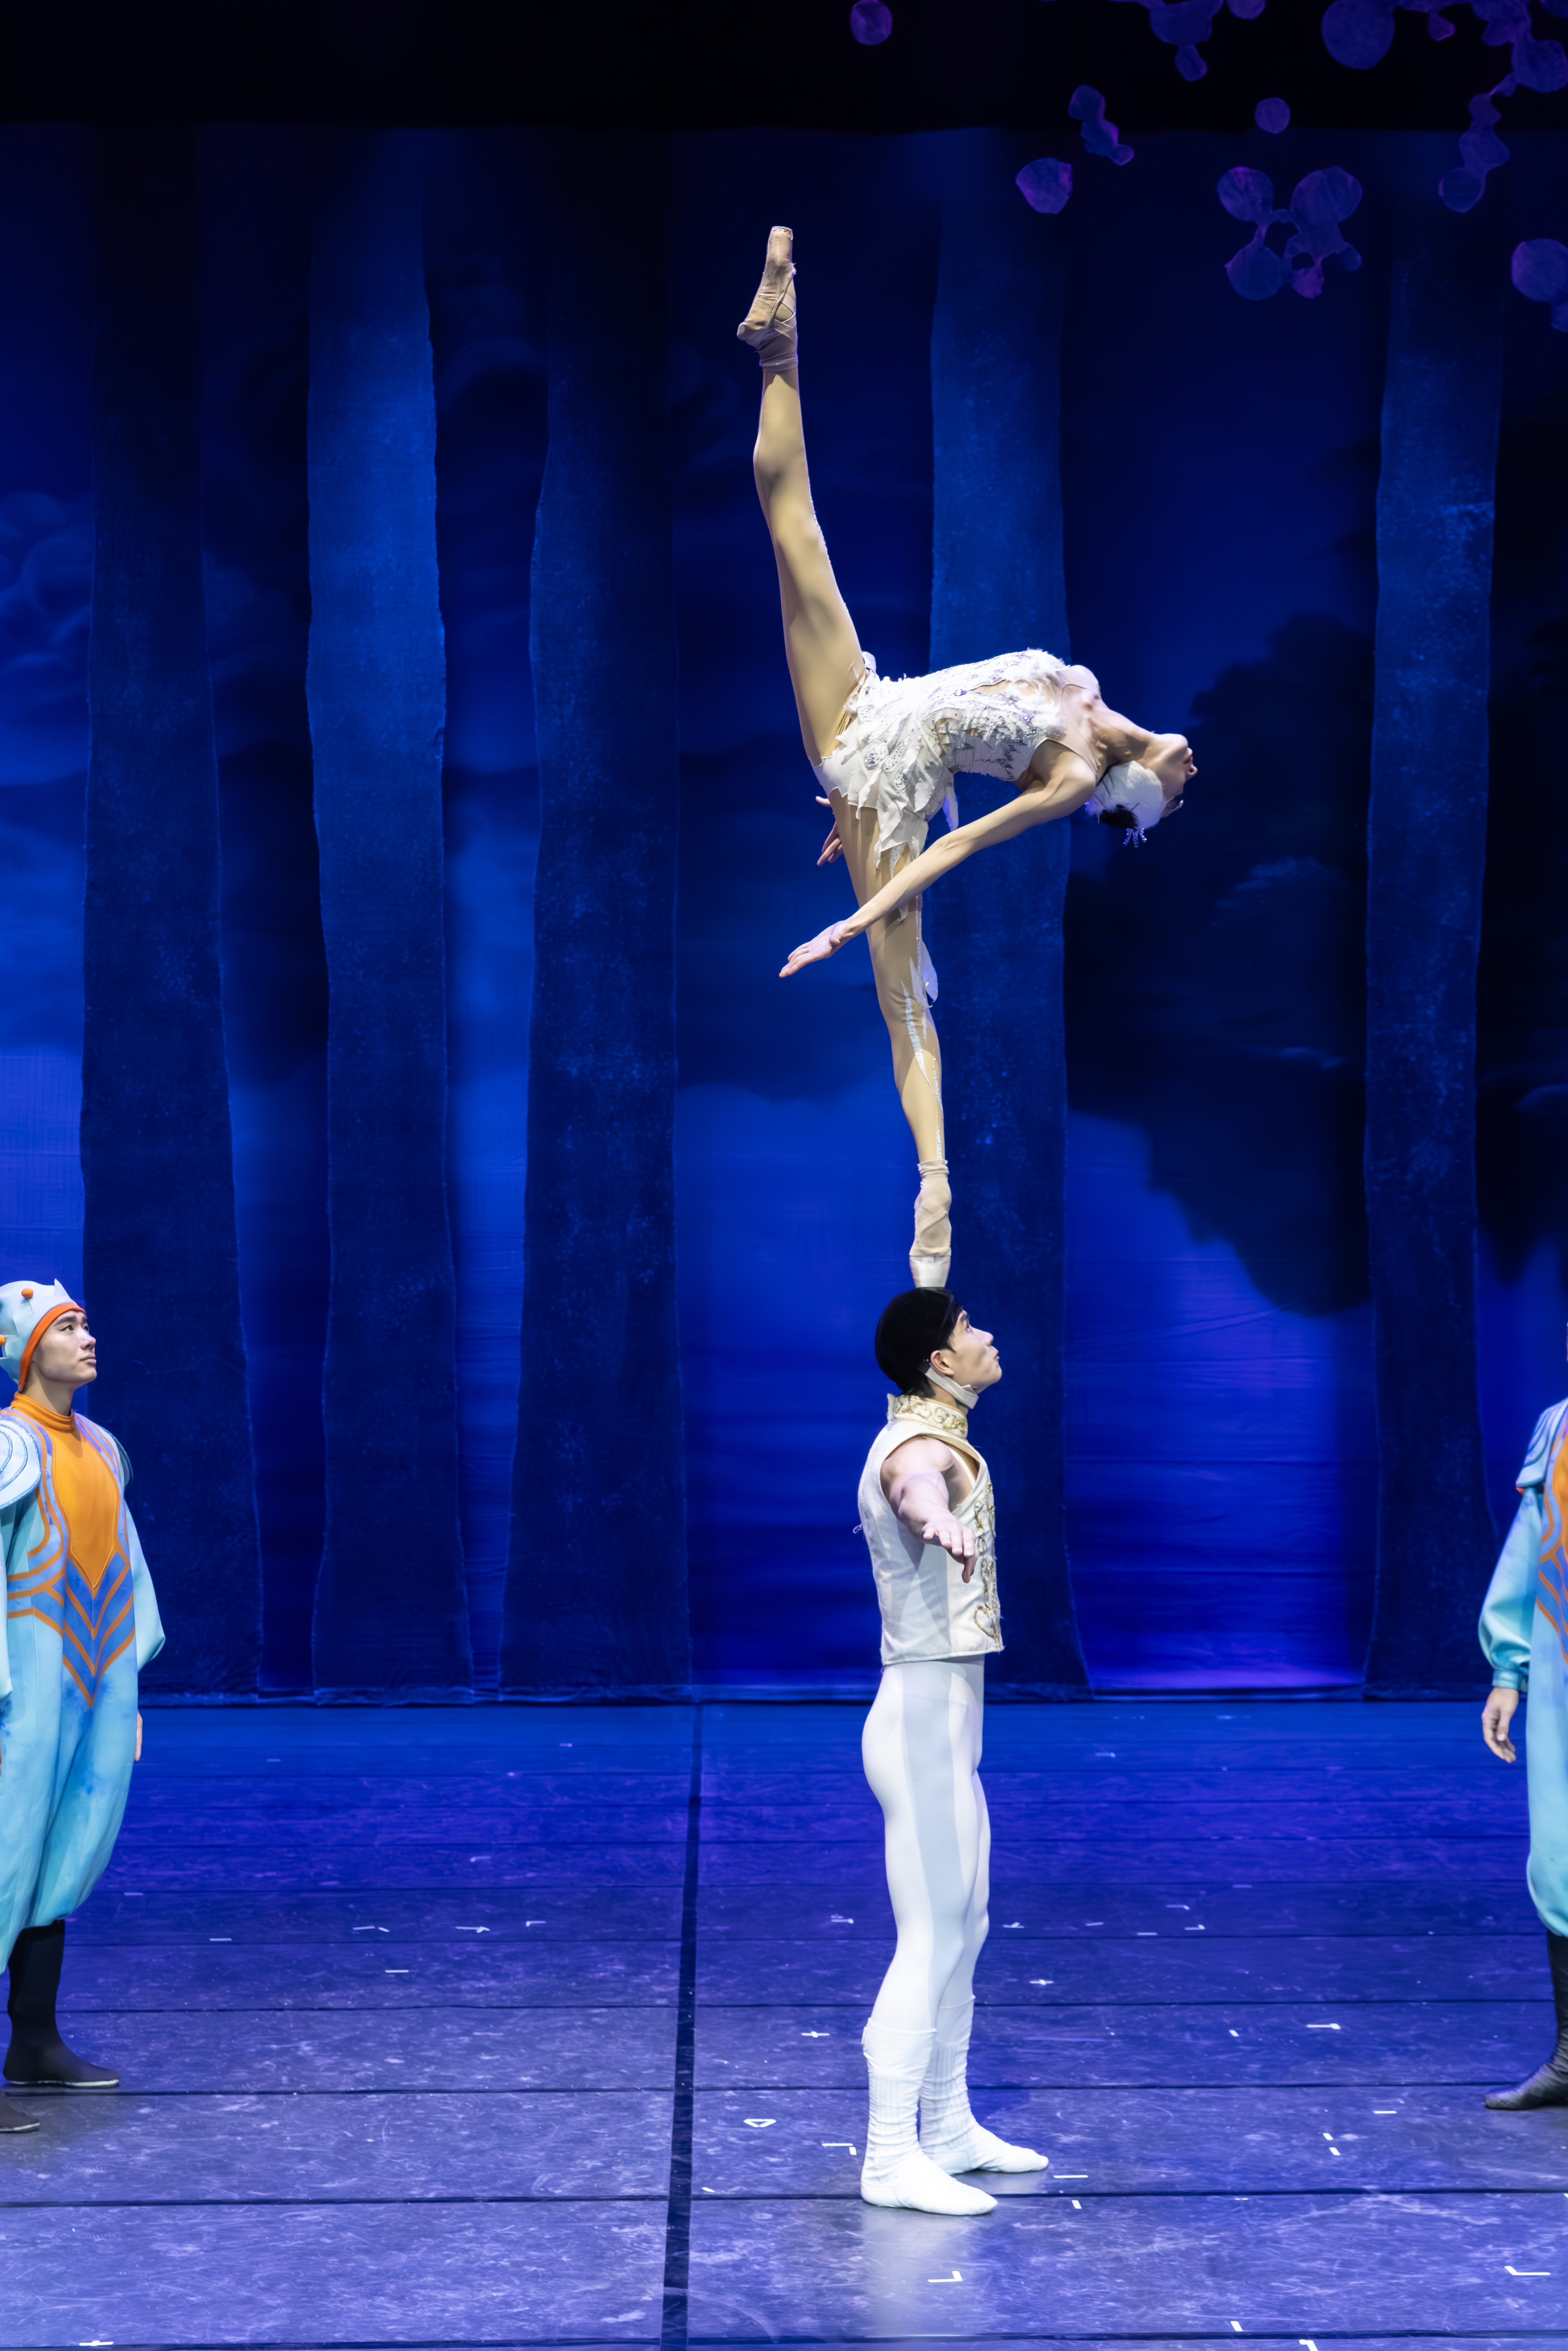 The finale 'Ballet on head' during Acrobatic Swan Lake performance. /Xi'an Acrobatic Troope